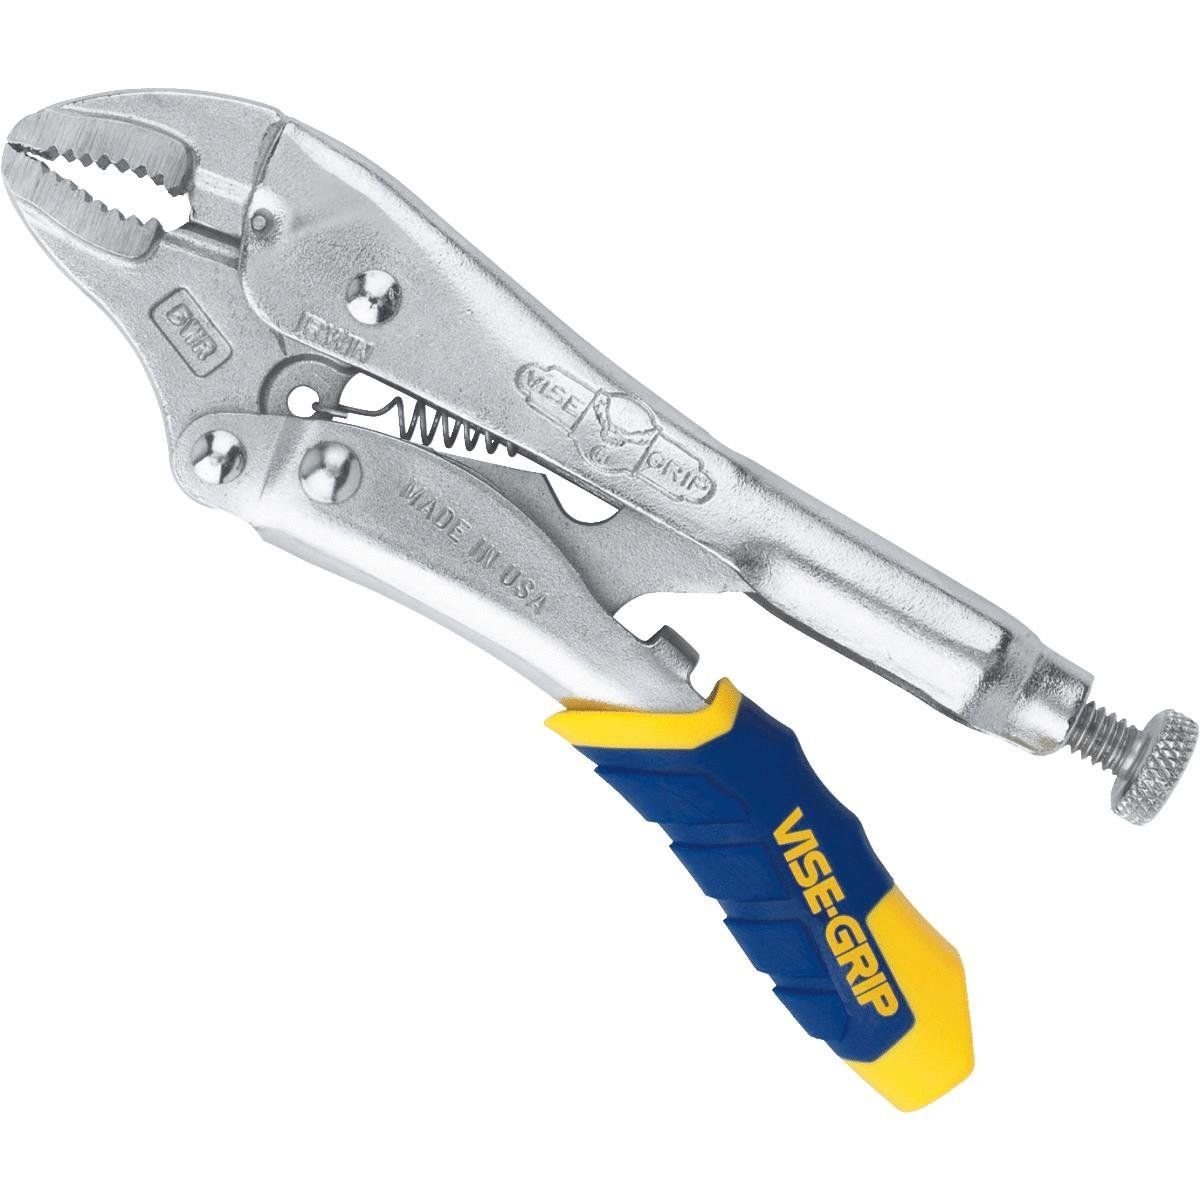 5WR Fast Release Curved Jaw Locking Pliers w Wire Cutter 5 Inch,